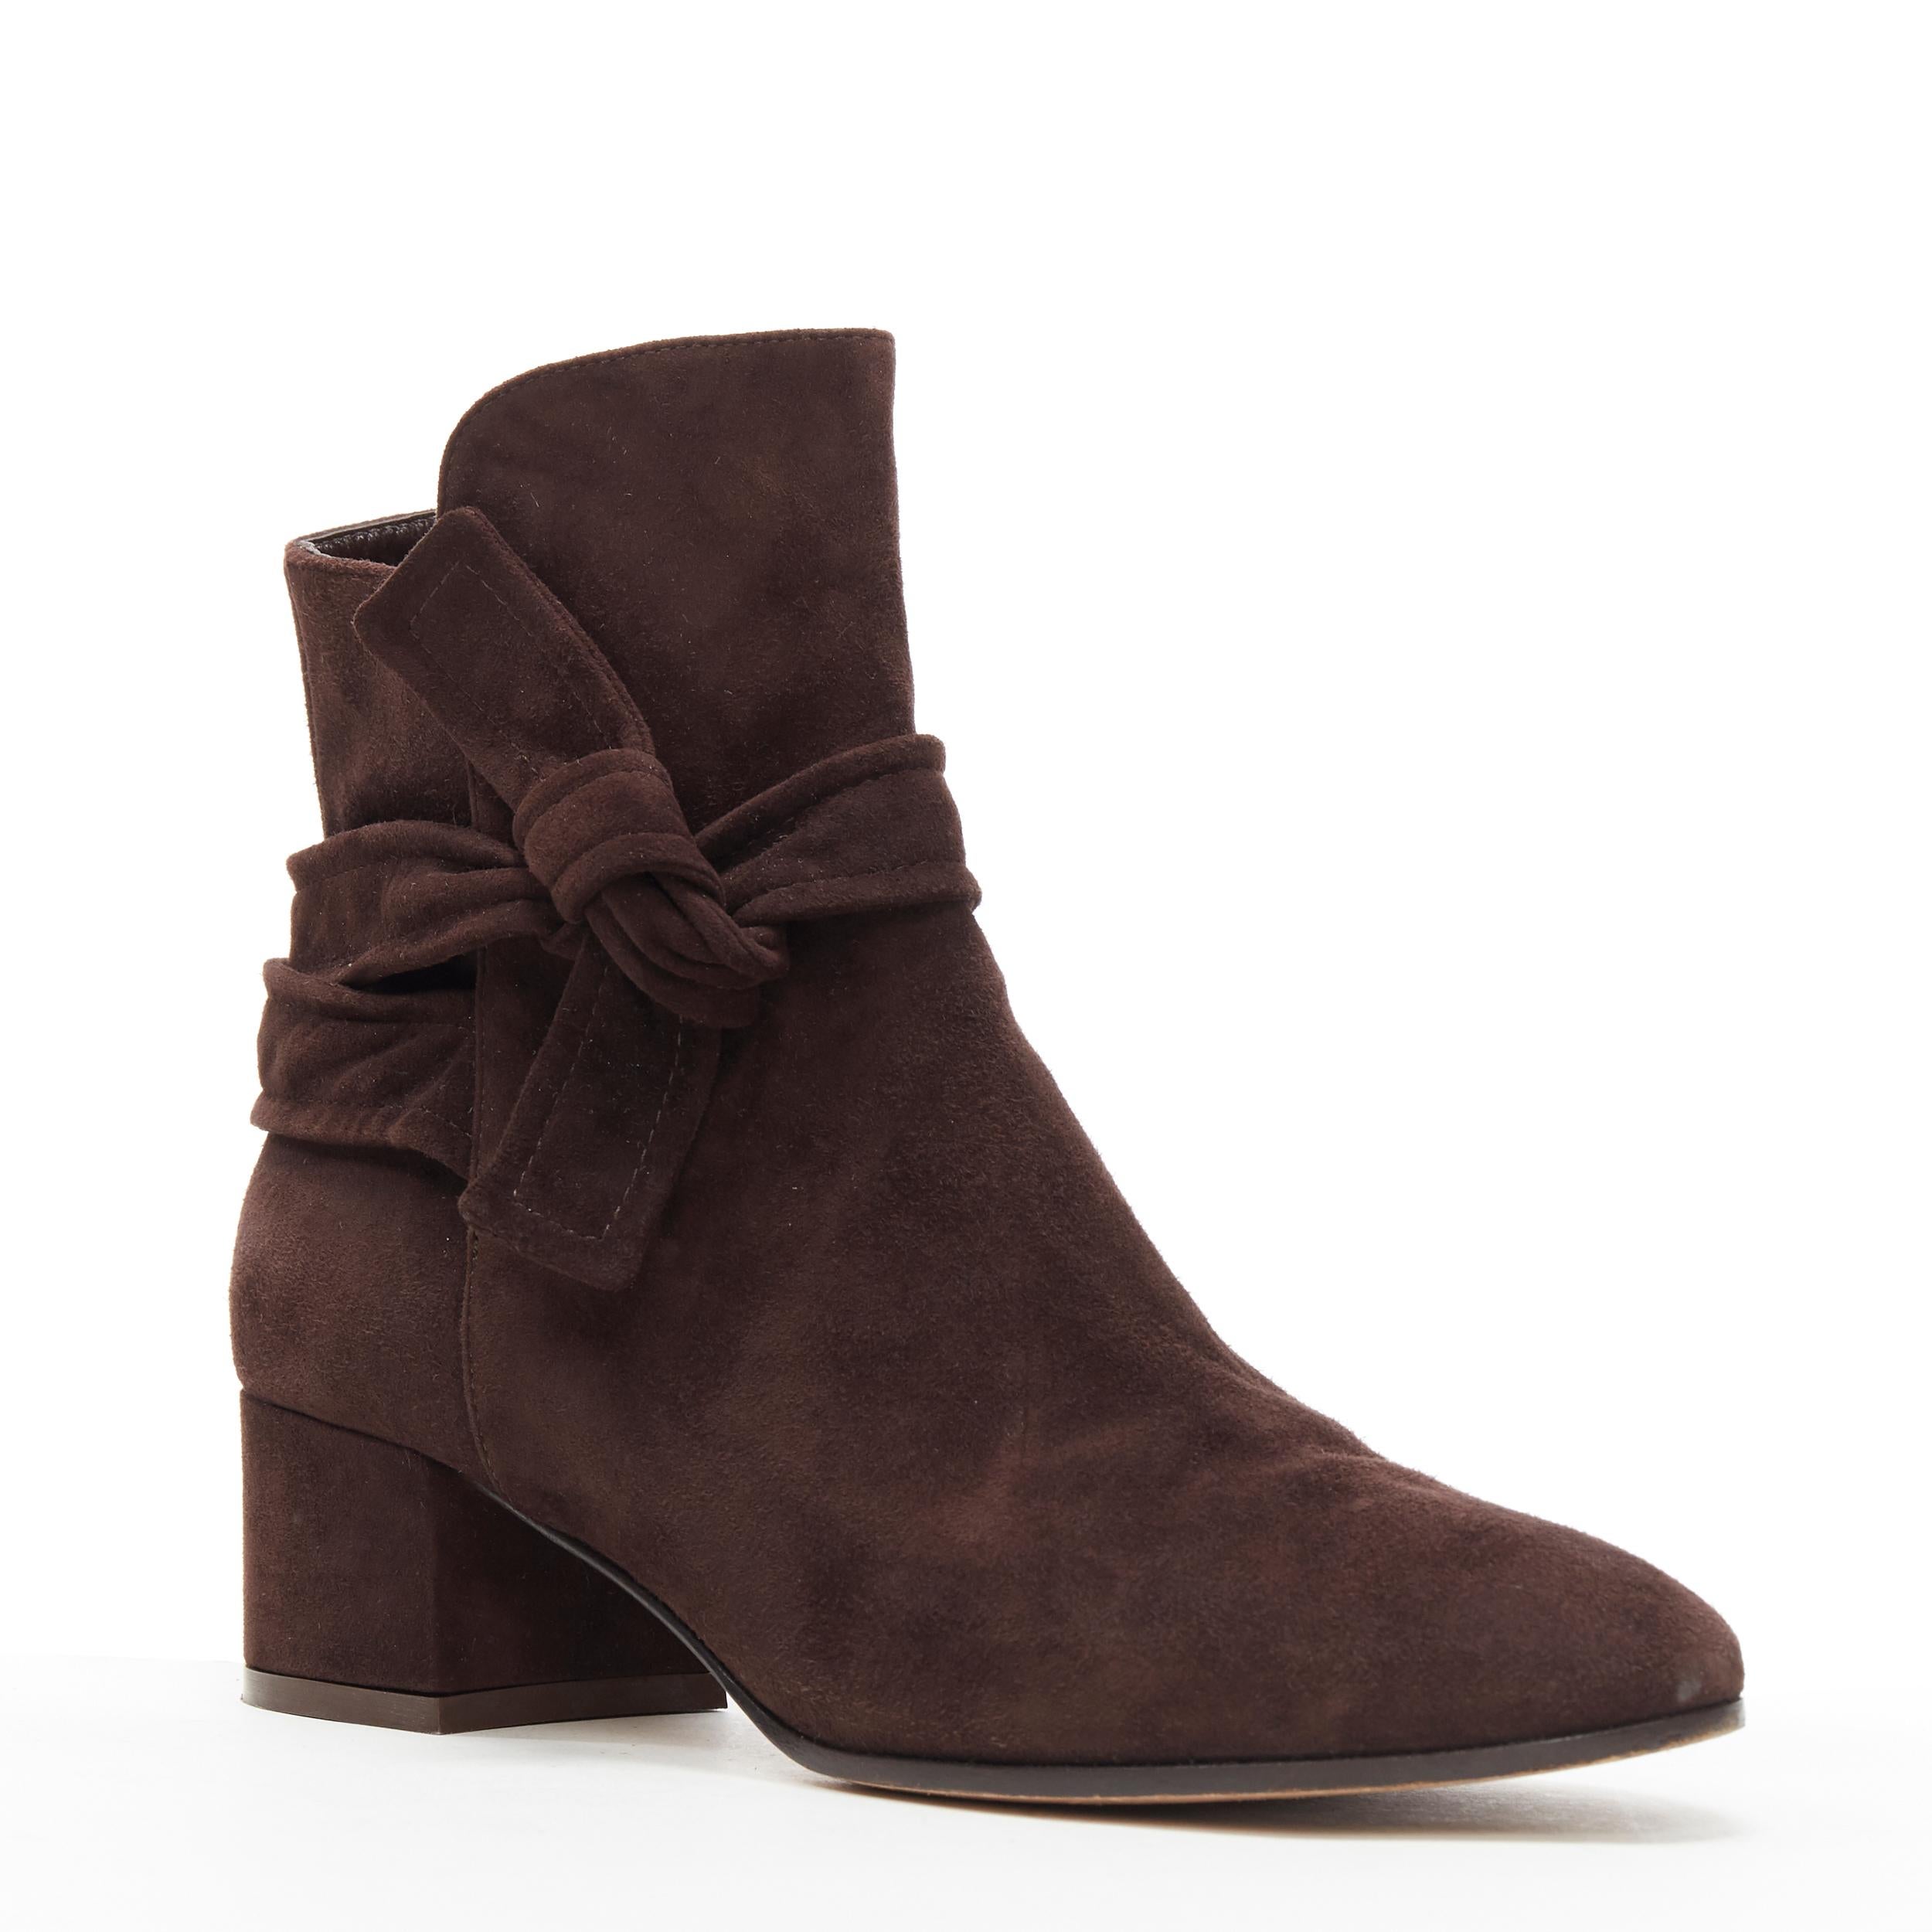 GIANVITO ROSSI dark brown suede wrap tie chunky block heel ankle boot EU37
Brand: Gianvito Rossi
Designer: Gianvito Rossi
Model Name / Style: Ankle boot
Material: Suede
Color: Brown
Pattern: Solid
Extra Detail: Self tie ankle strap detail. Mid